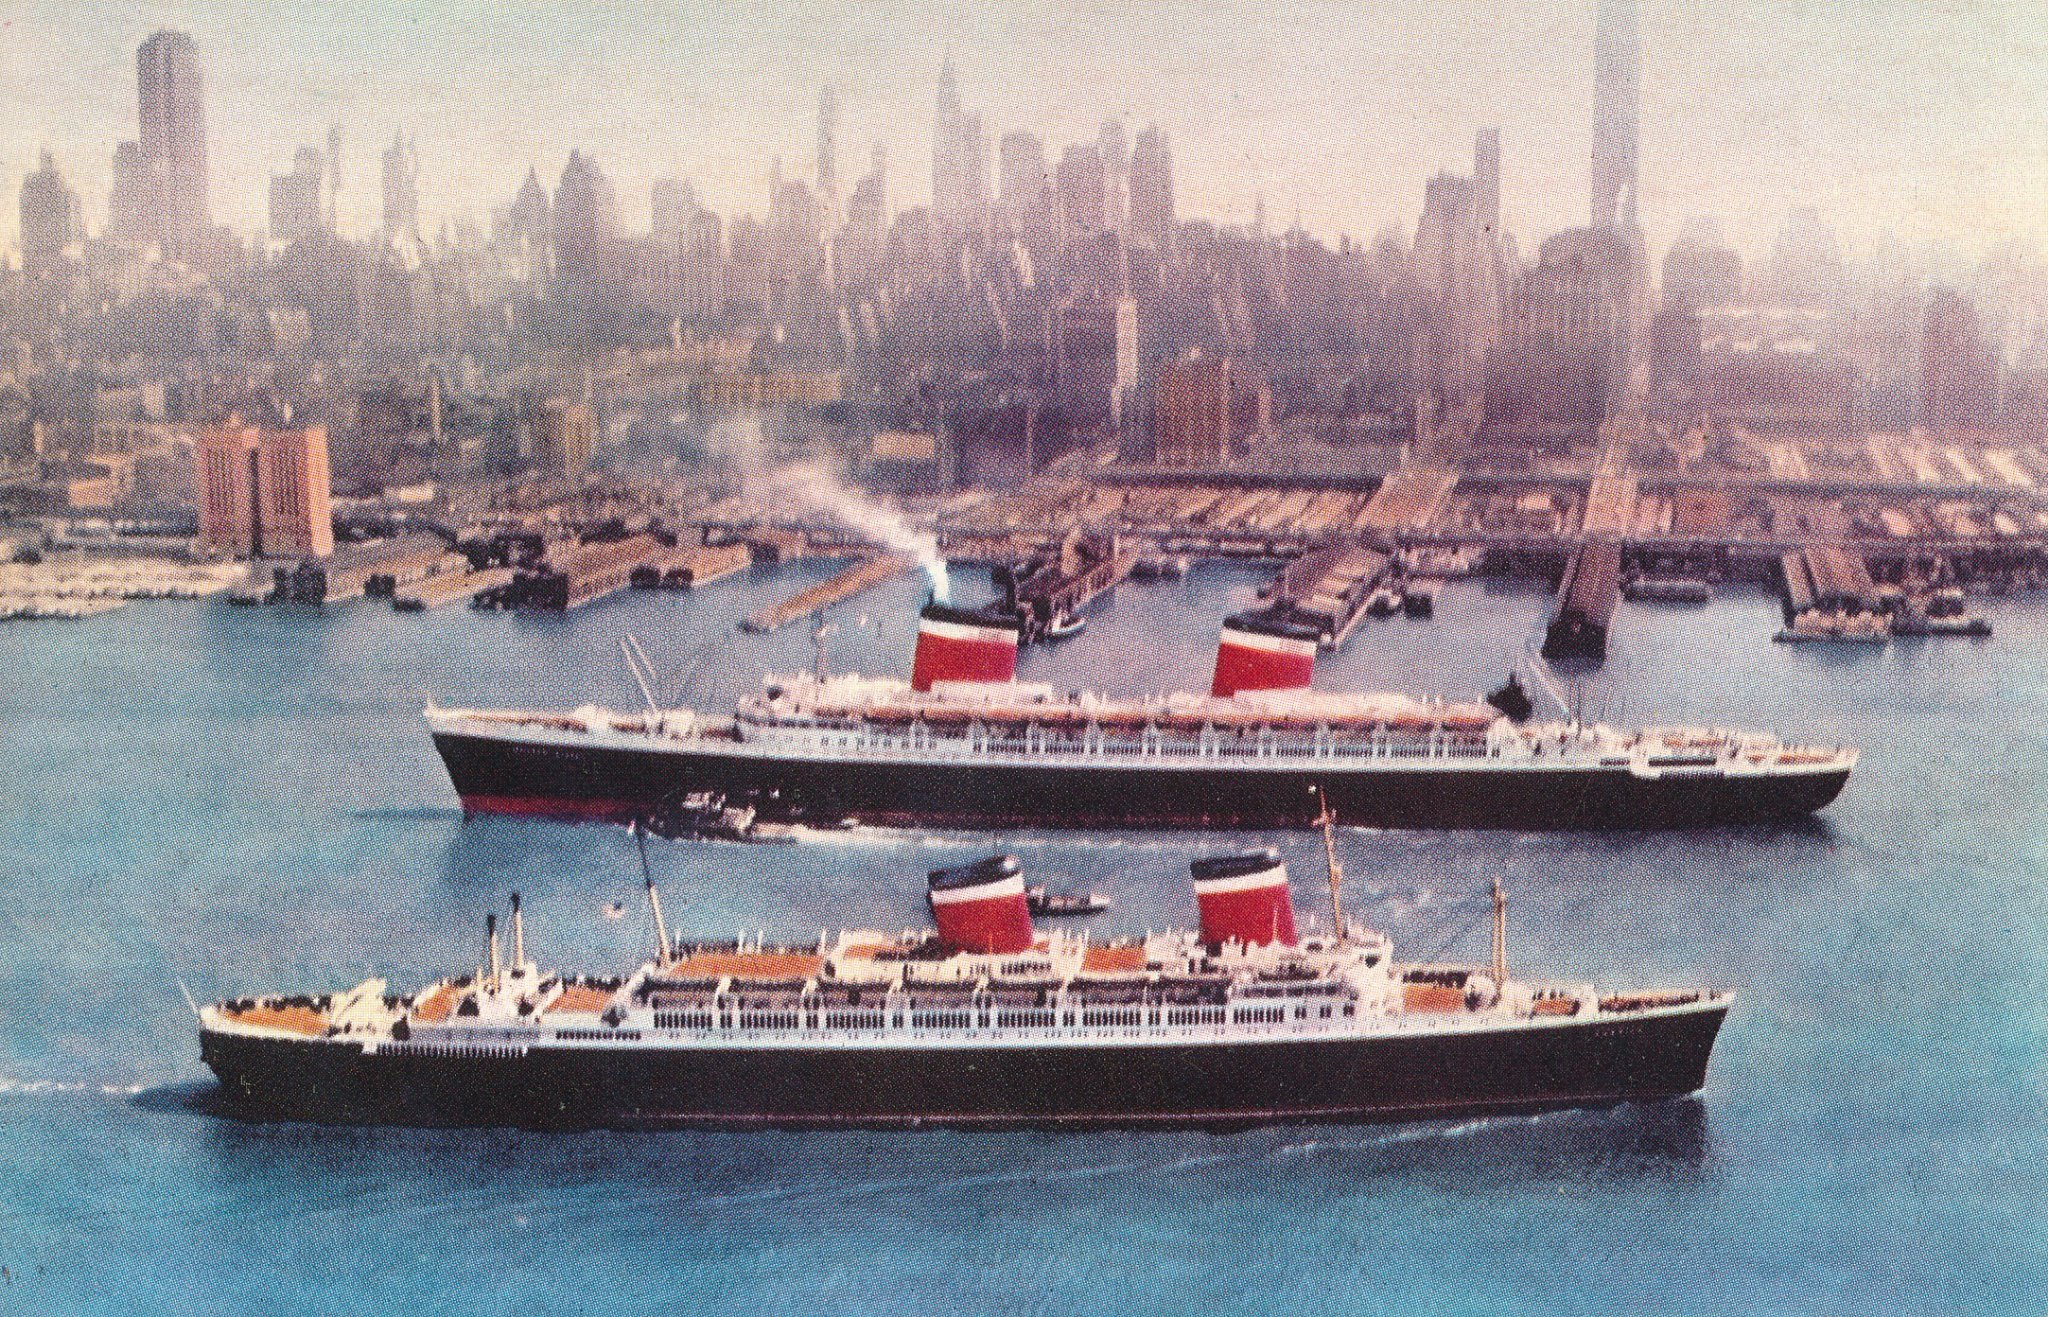 Postcard of the SS America and the SS United States